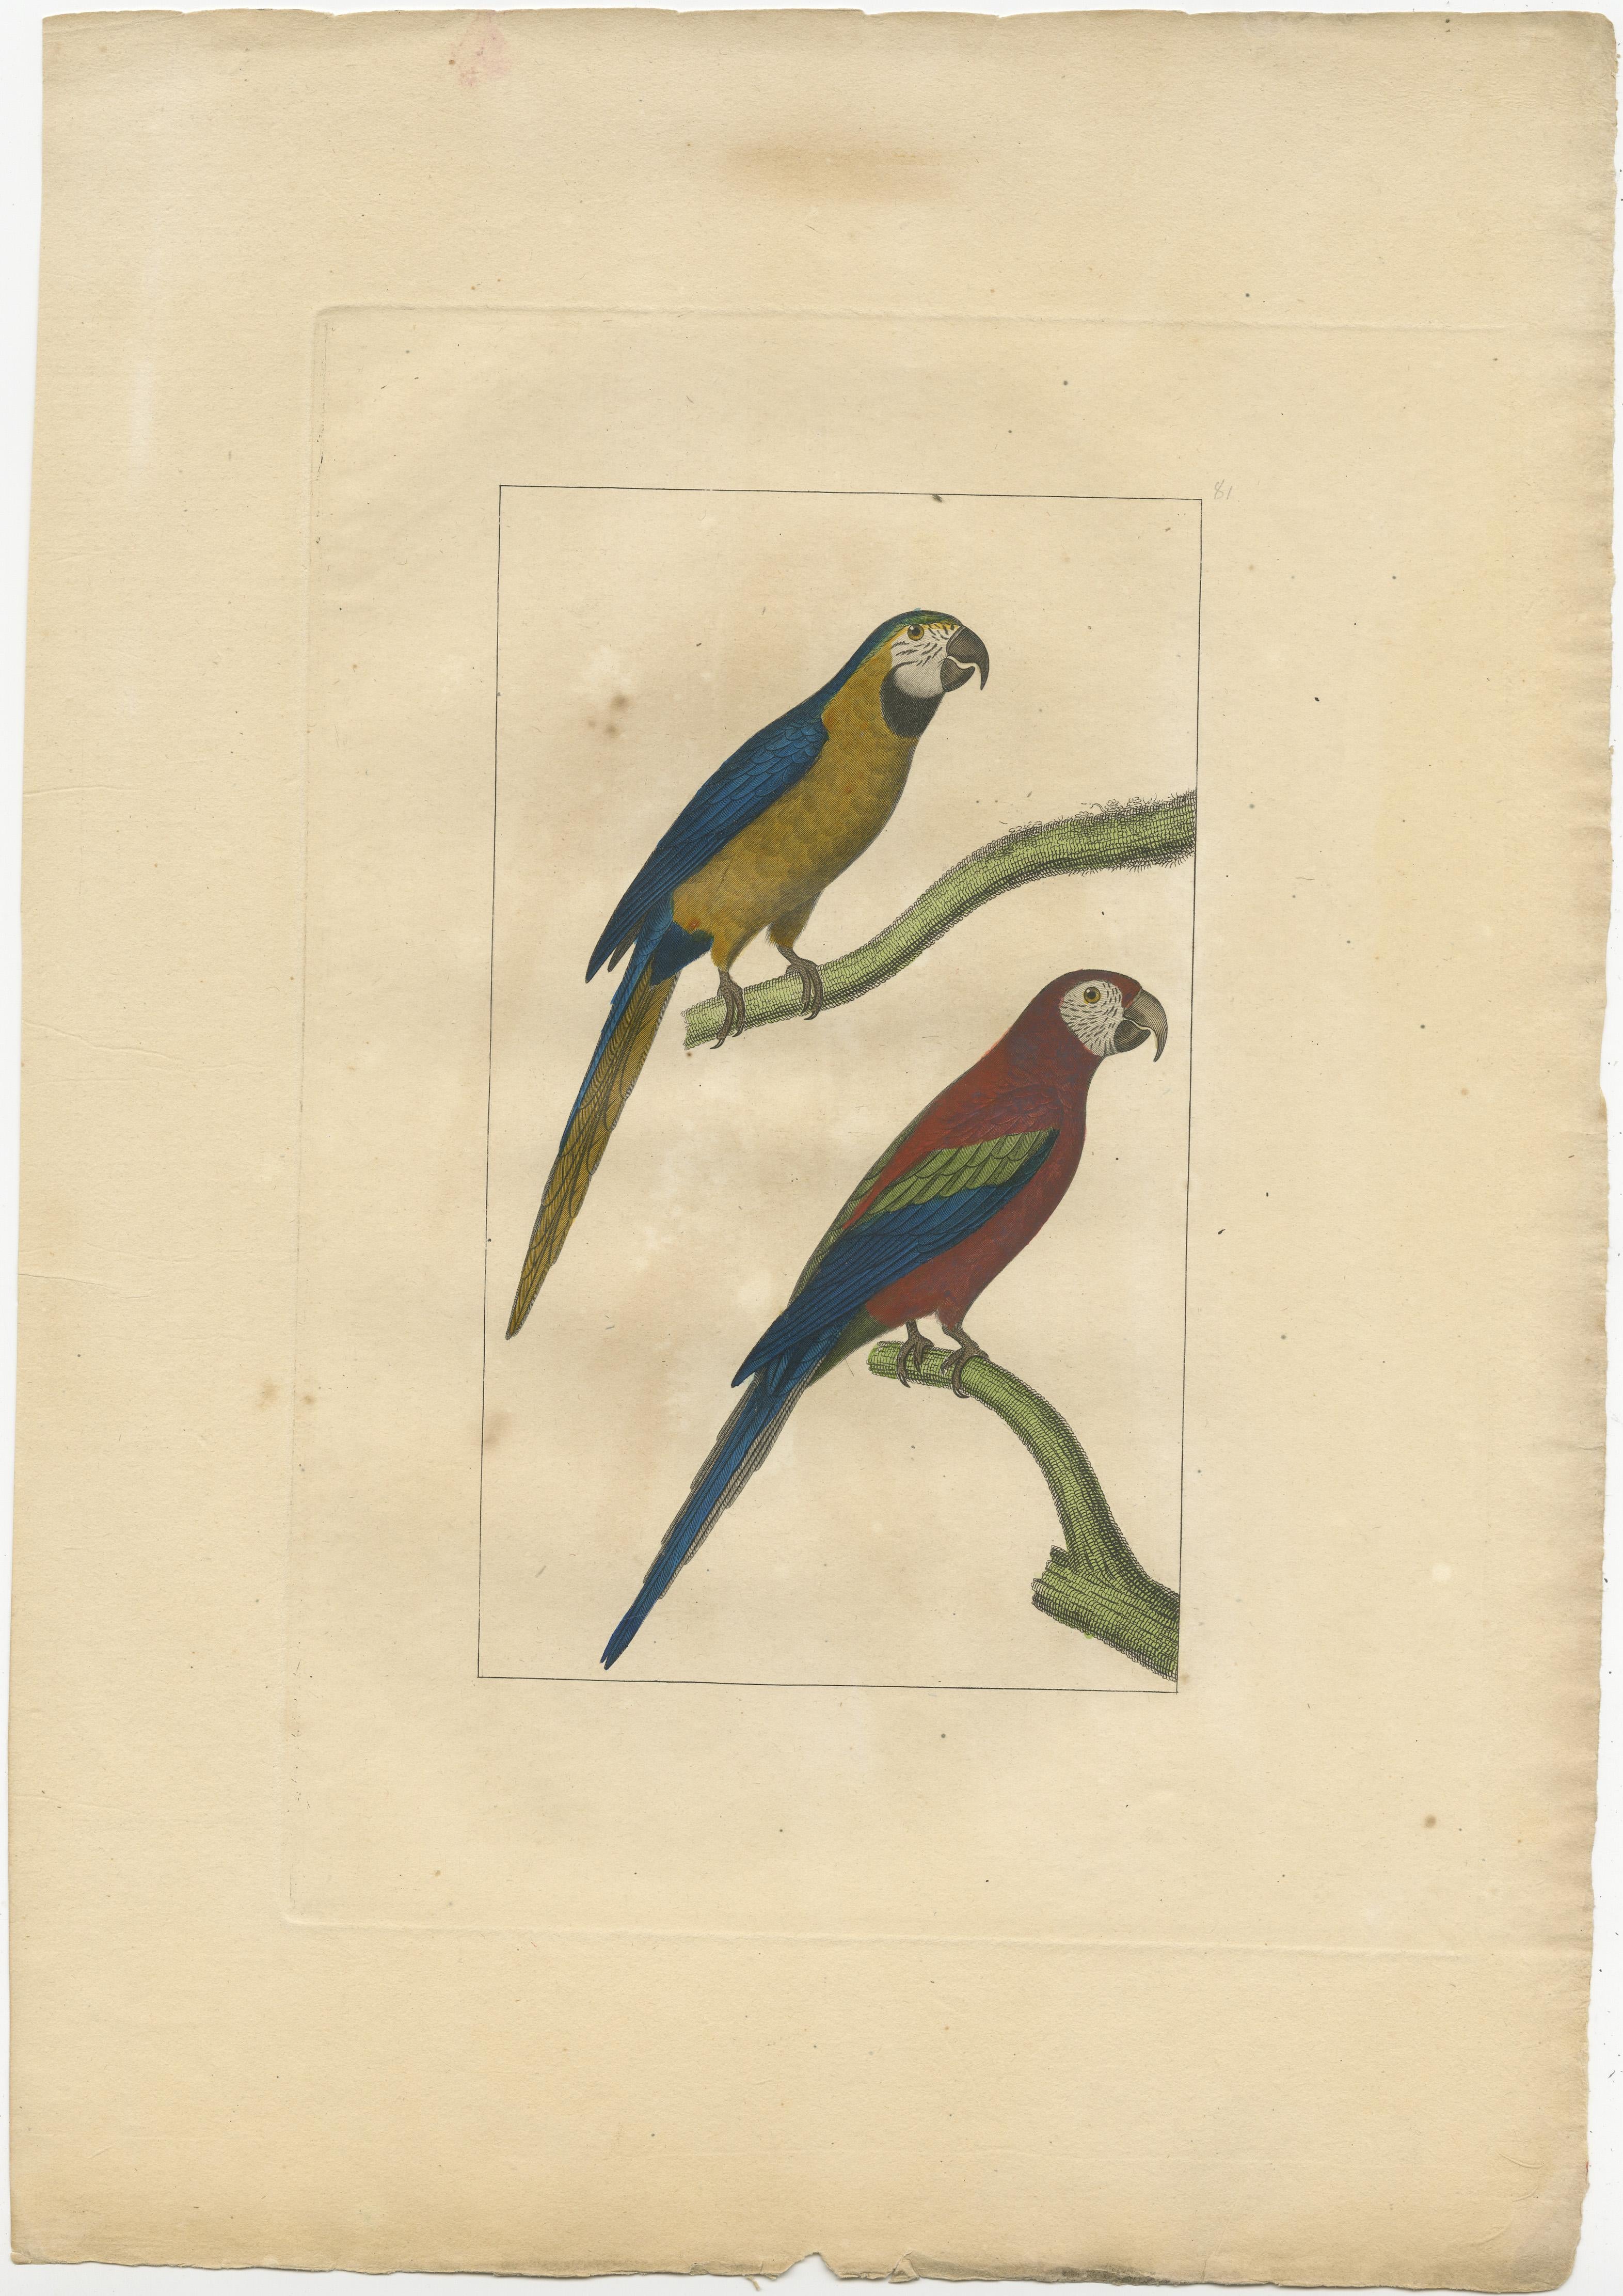 Untitled bird print of parrots. Source unknown, to be determined. Published circa 1860.